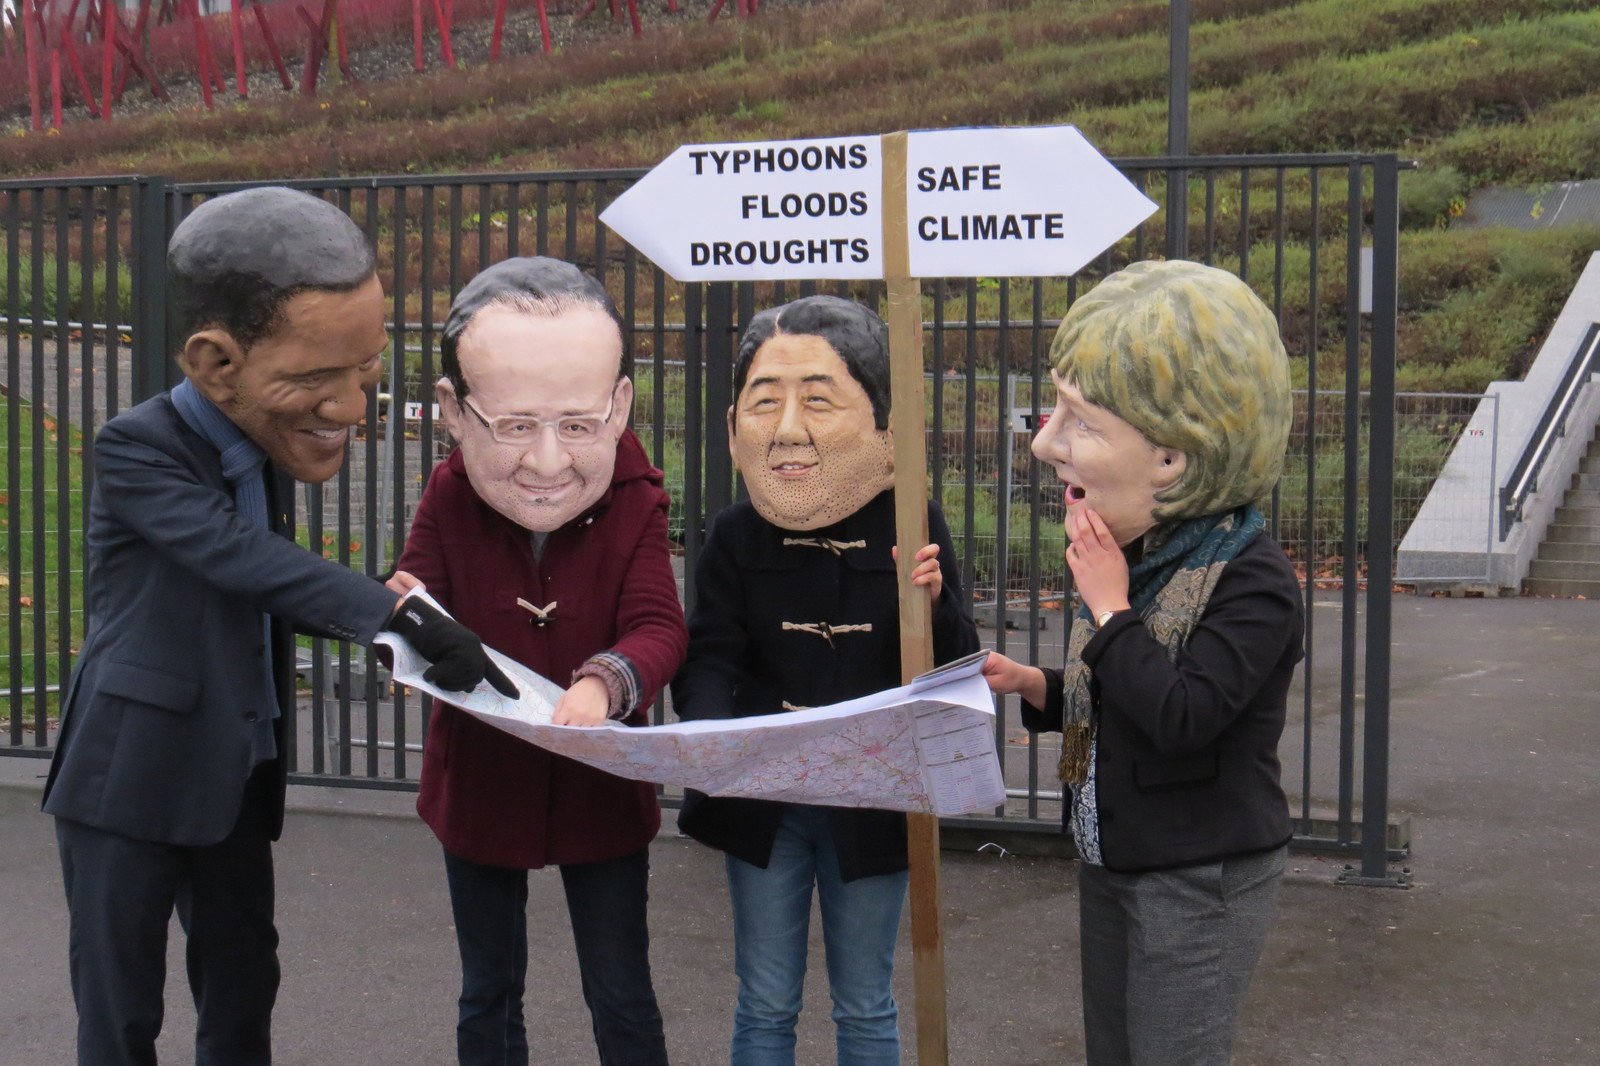 Big headed’ world leaders from Japan, France, Germany, US stand at a fork in the road. Oxfam says world leaders must decide which route they want to take after the fiasco of Warsaw climate talks.